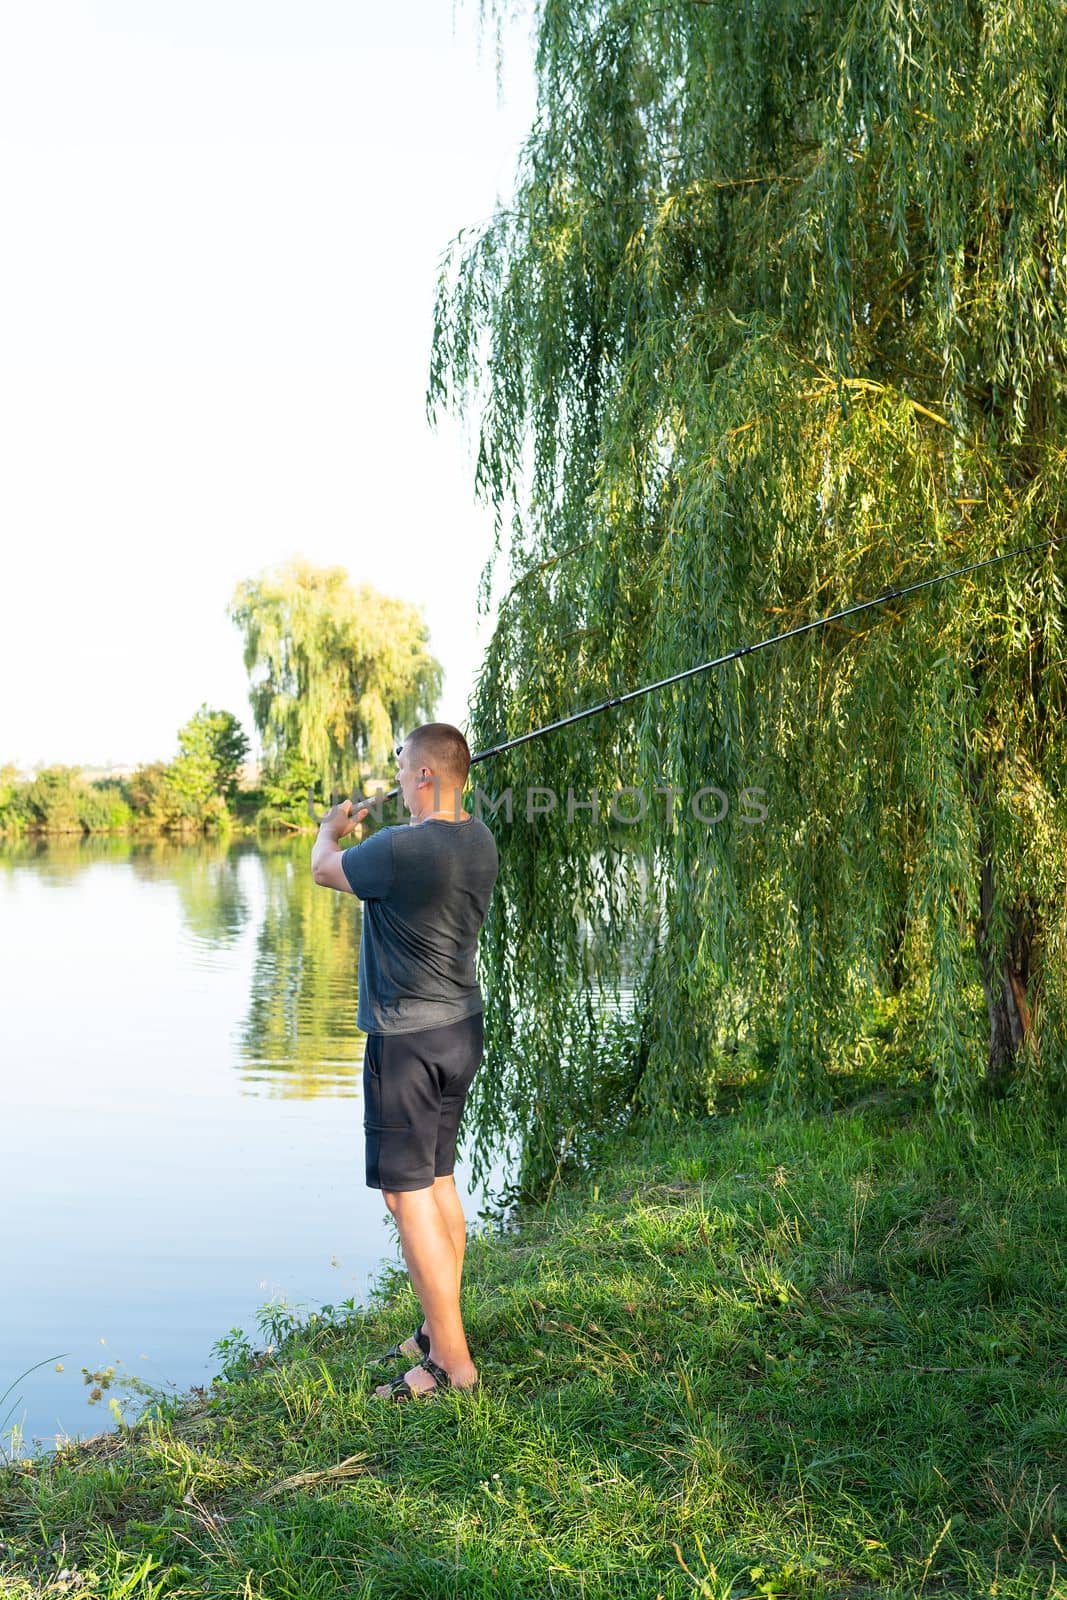 Fishing Reel. The guy throws a fishing rod against the backdrop of the lake. The concept of relaxation and hobby for the soul